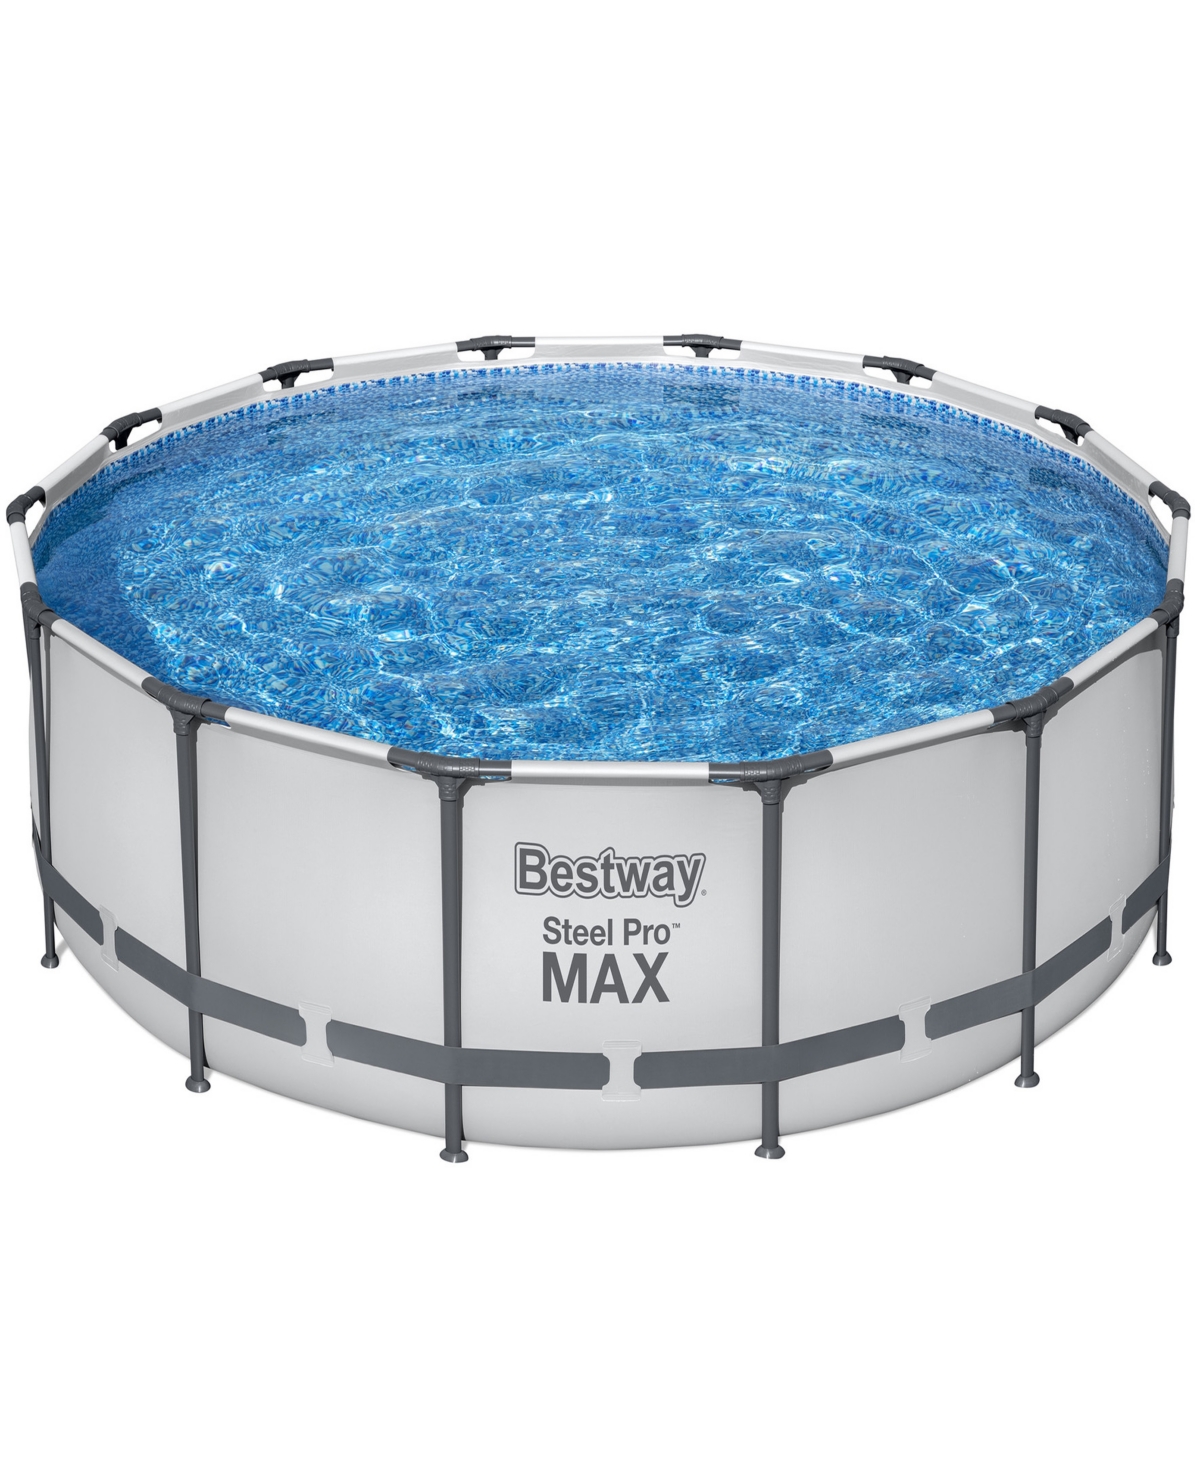 Steel Pro Kids' Bestway 14' X 42" Above Ground Pool Set 3440 Gallon, Outdoor Family Pool, Corrosion Puncture Resista In Multi